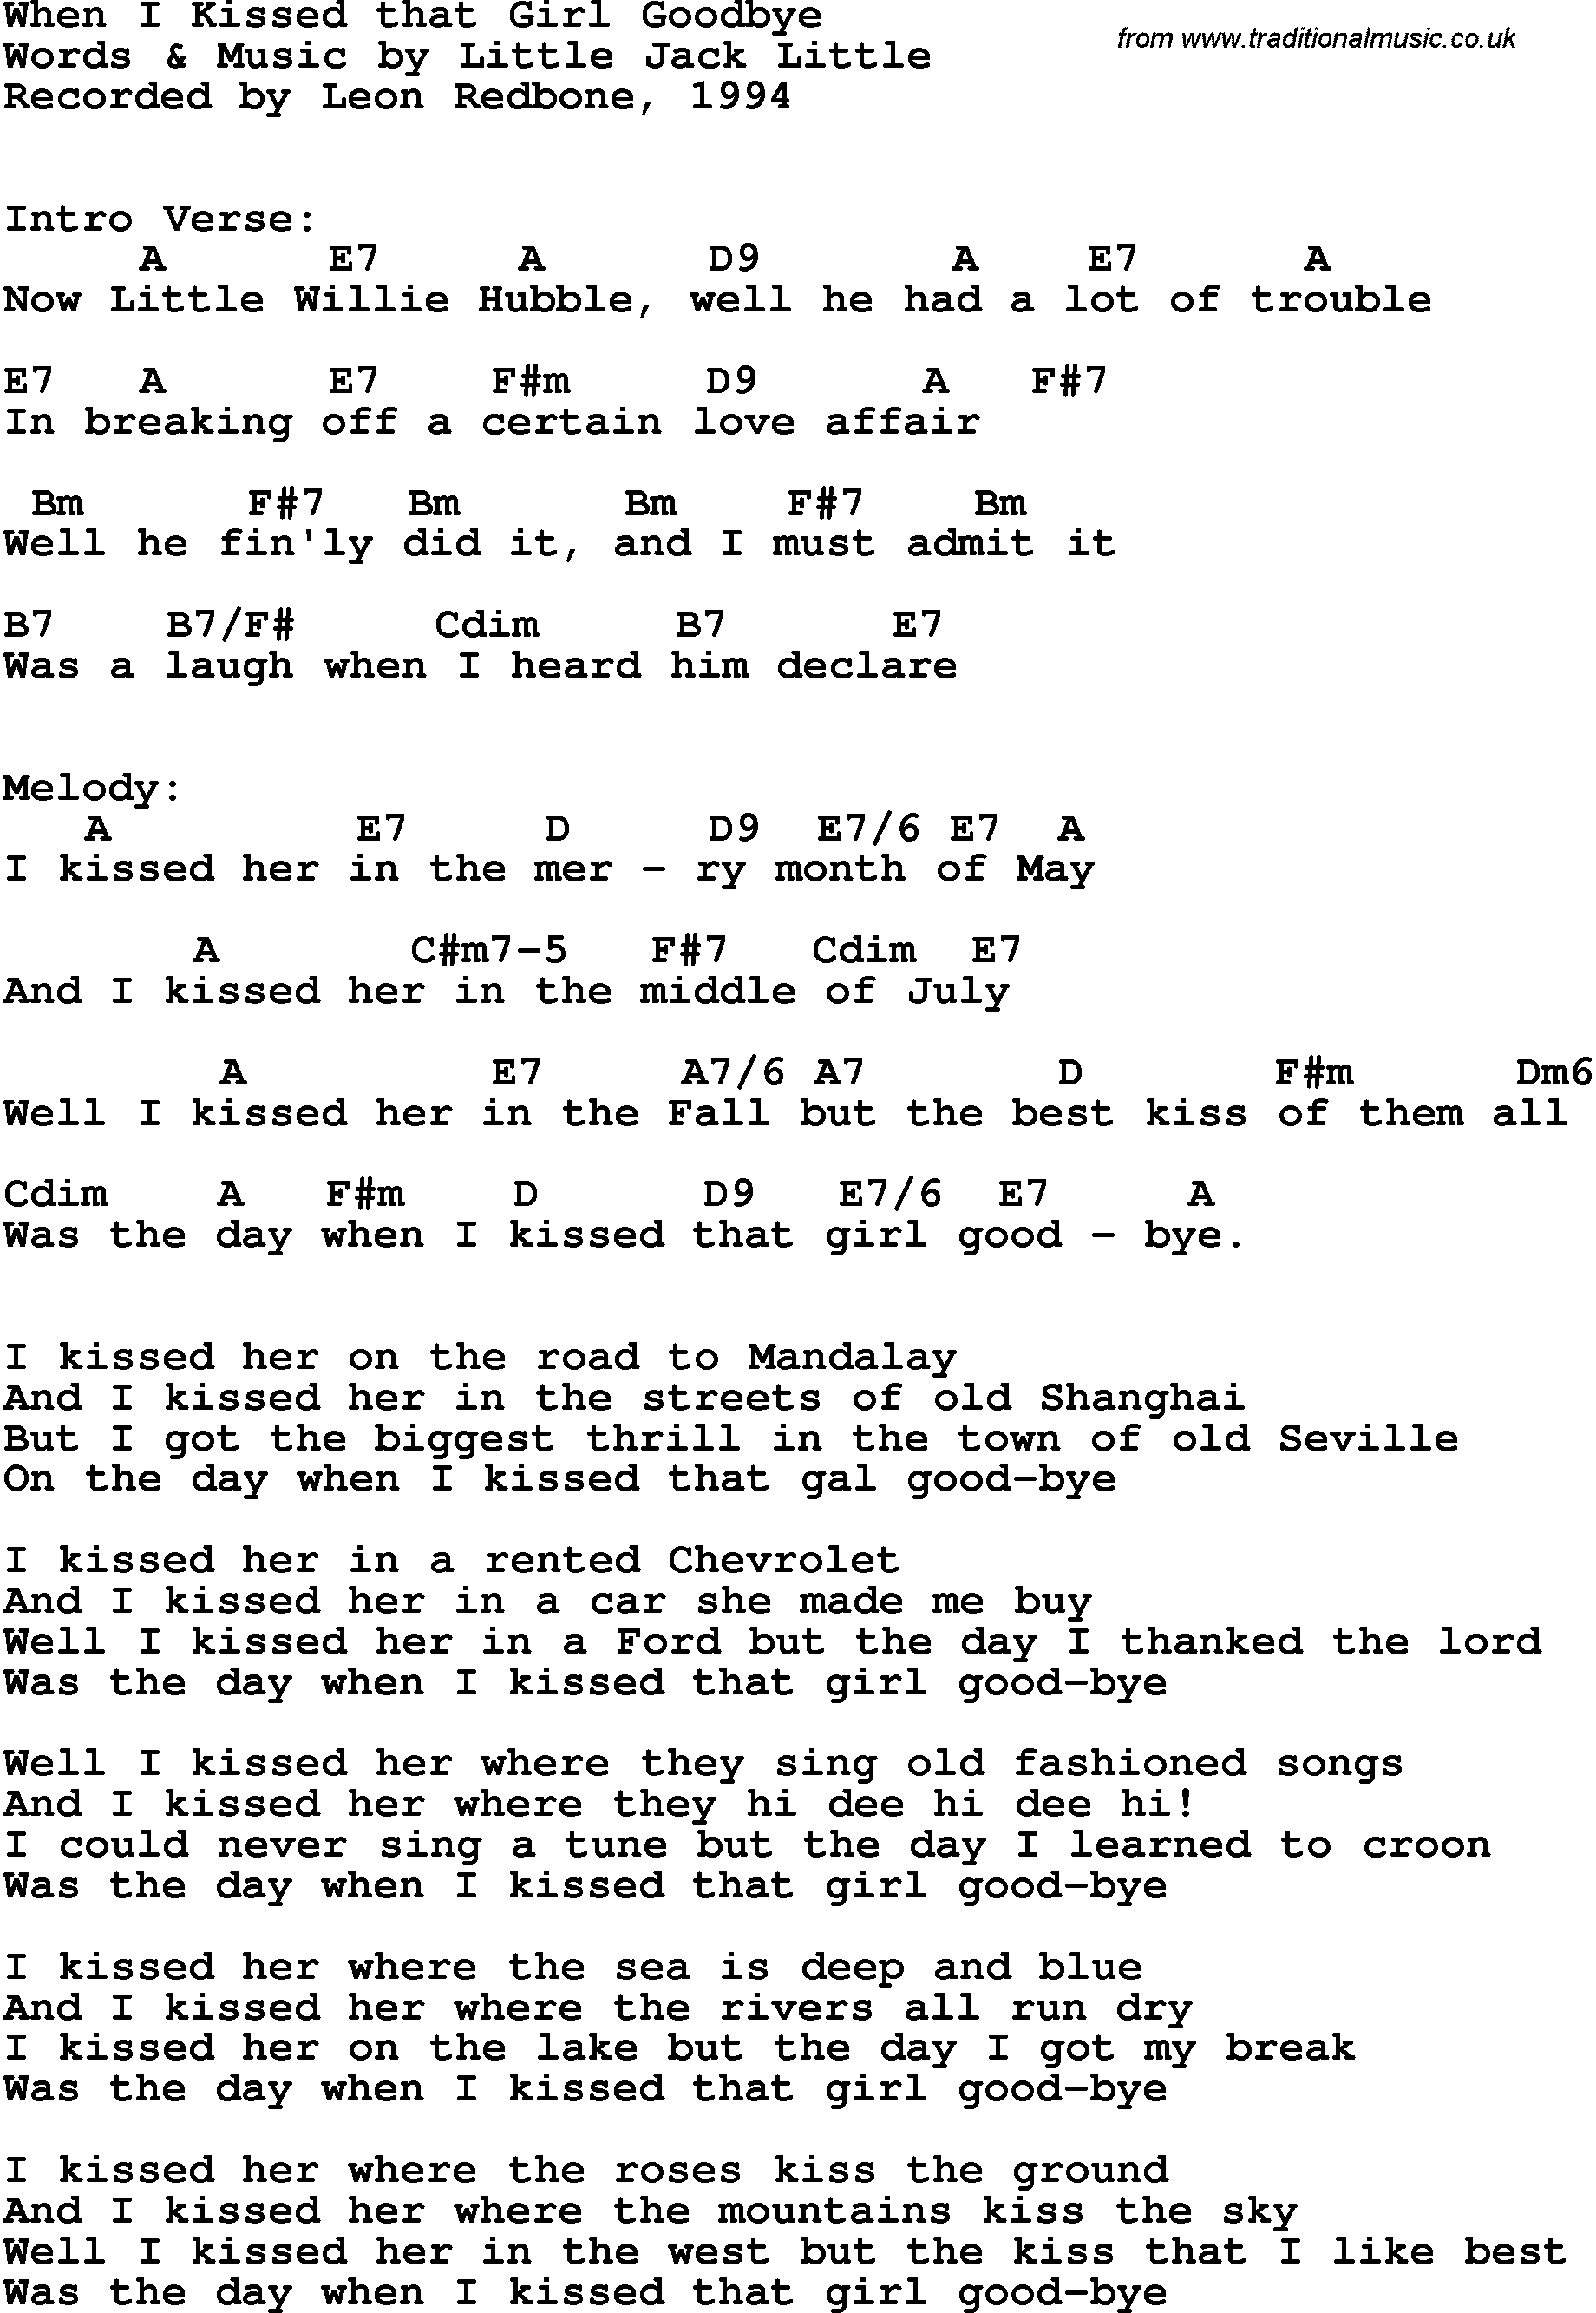 Song Lyrics with guitar chords for When I Kissed That Girl Goodbye - Leon Redbone, 1994